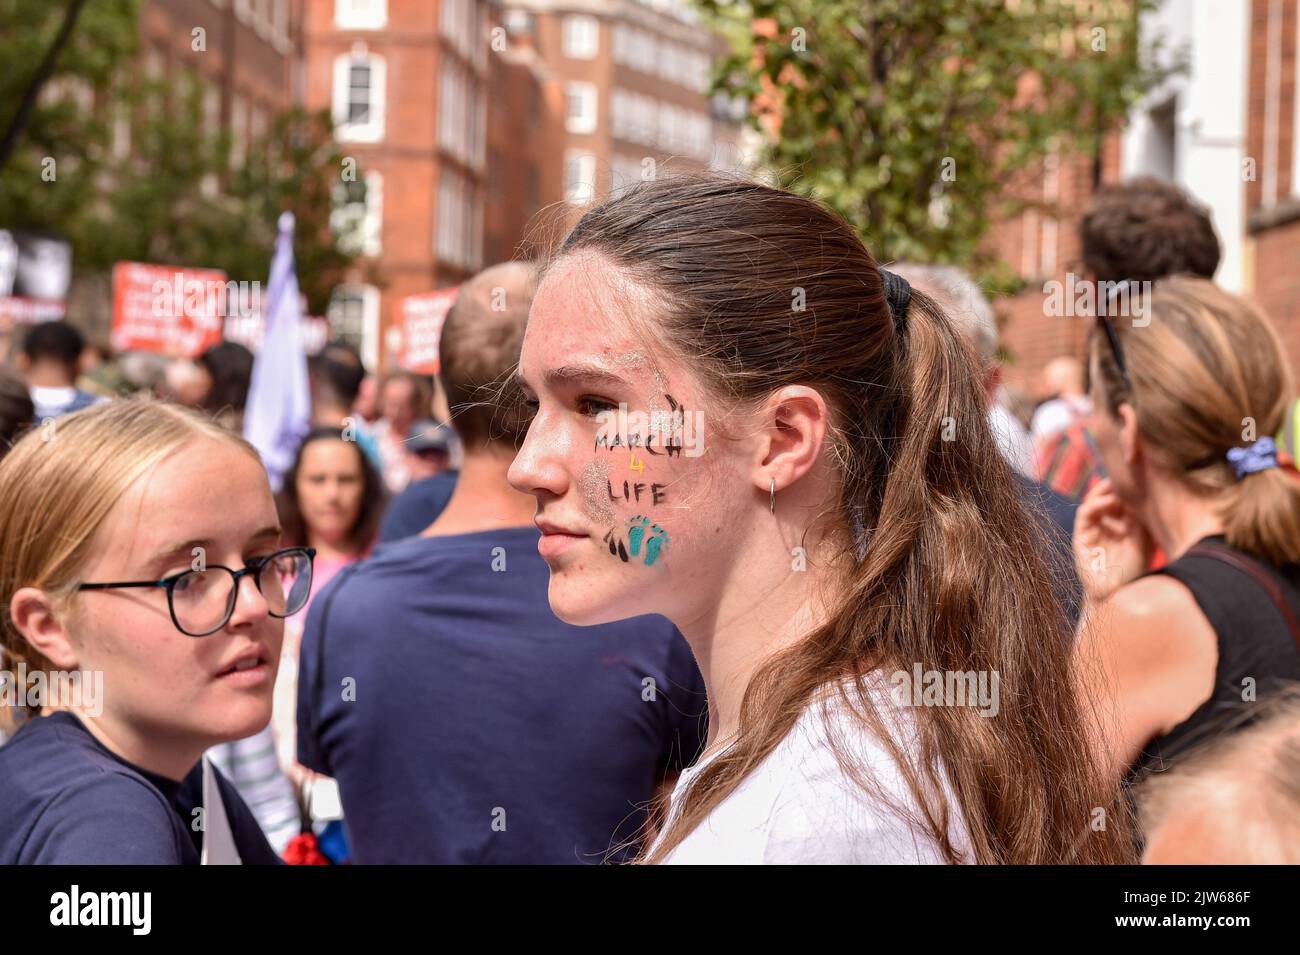 A protester with painting on her face saying "March For Life" takes part during the demonstration. Anti-Abortion activists and "Pro Life" protesters marched through central London to Parliament Square to mark their opposition to the abortion law in the UK. (Photo by Thomas Krych / SOPA Images/Sipa USA) Stock Photo